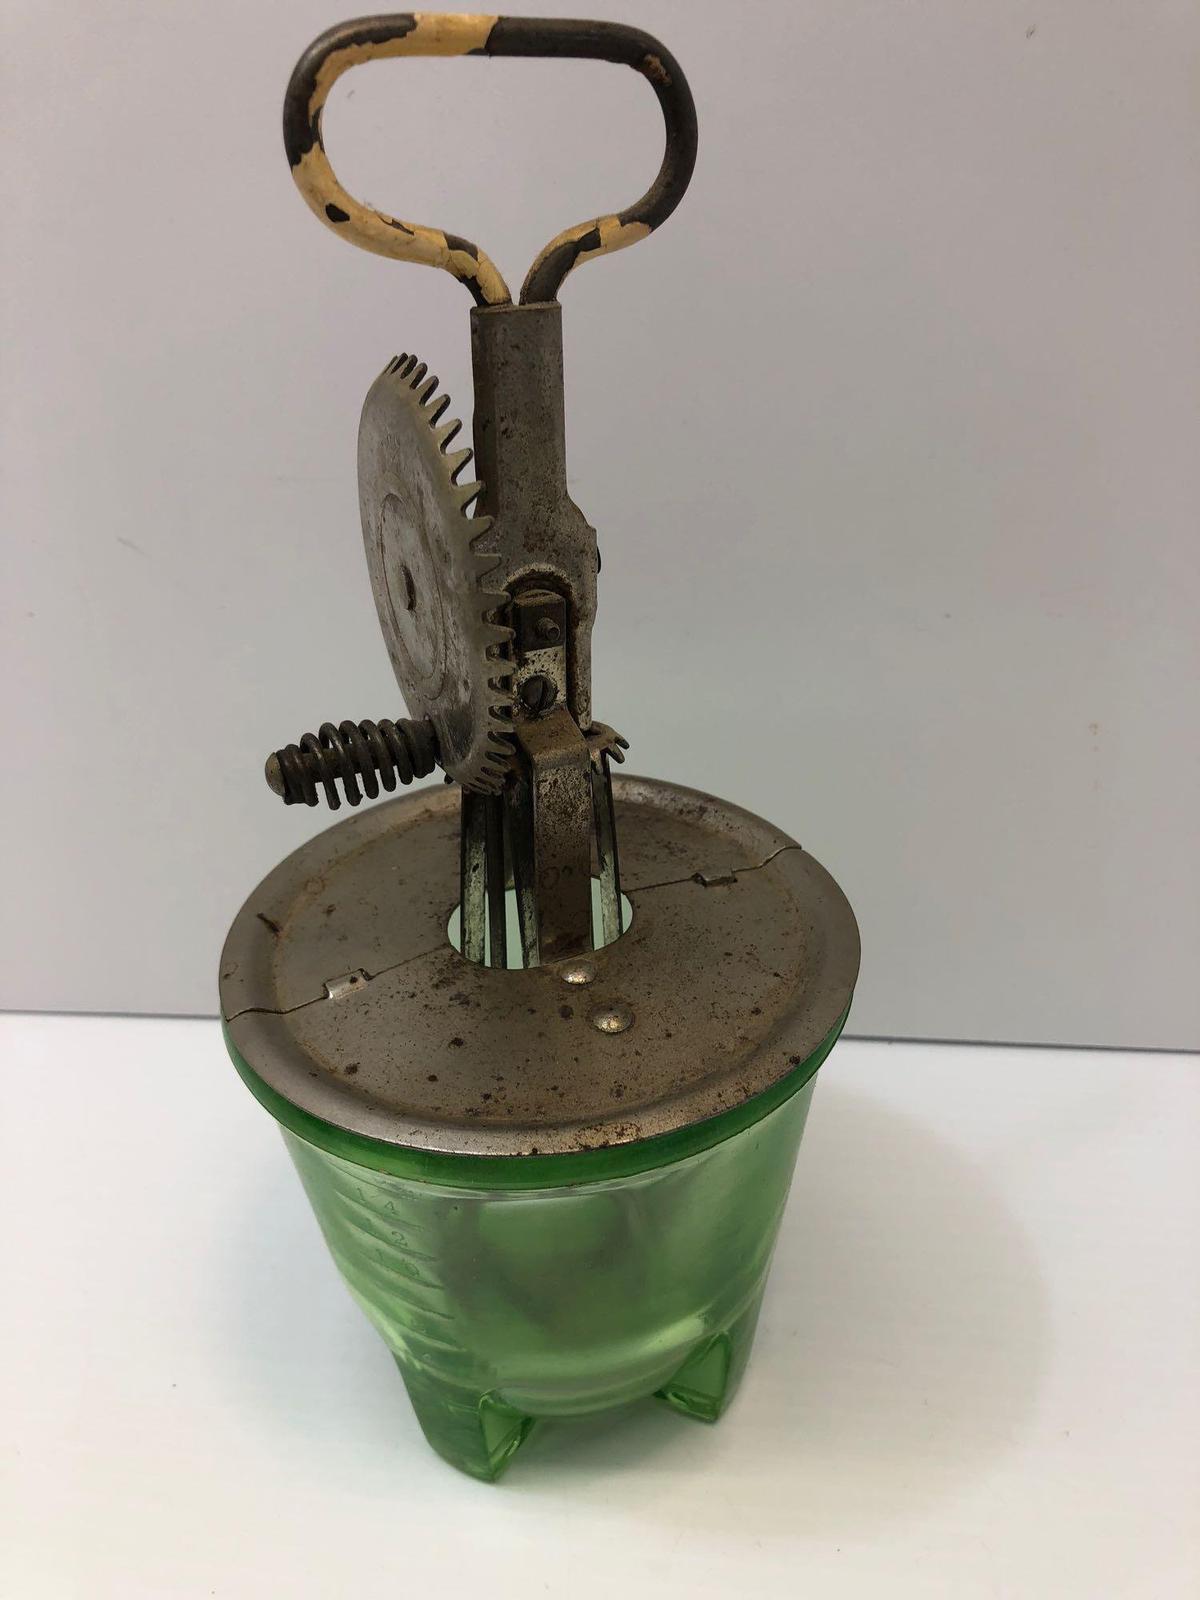 ANCHOR HOCKING measure cup/lid with beater